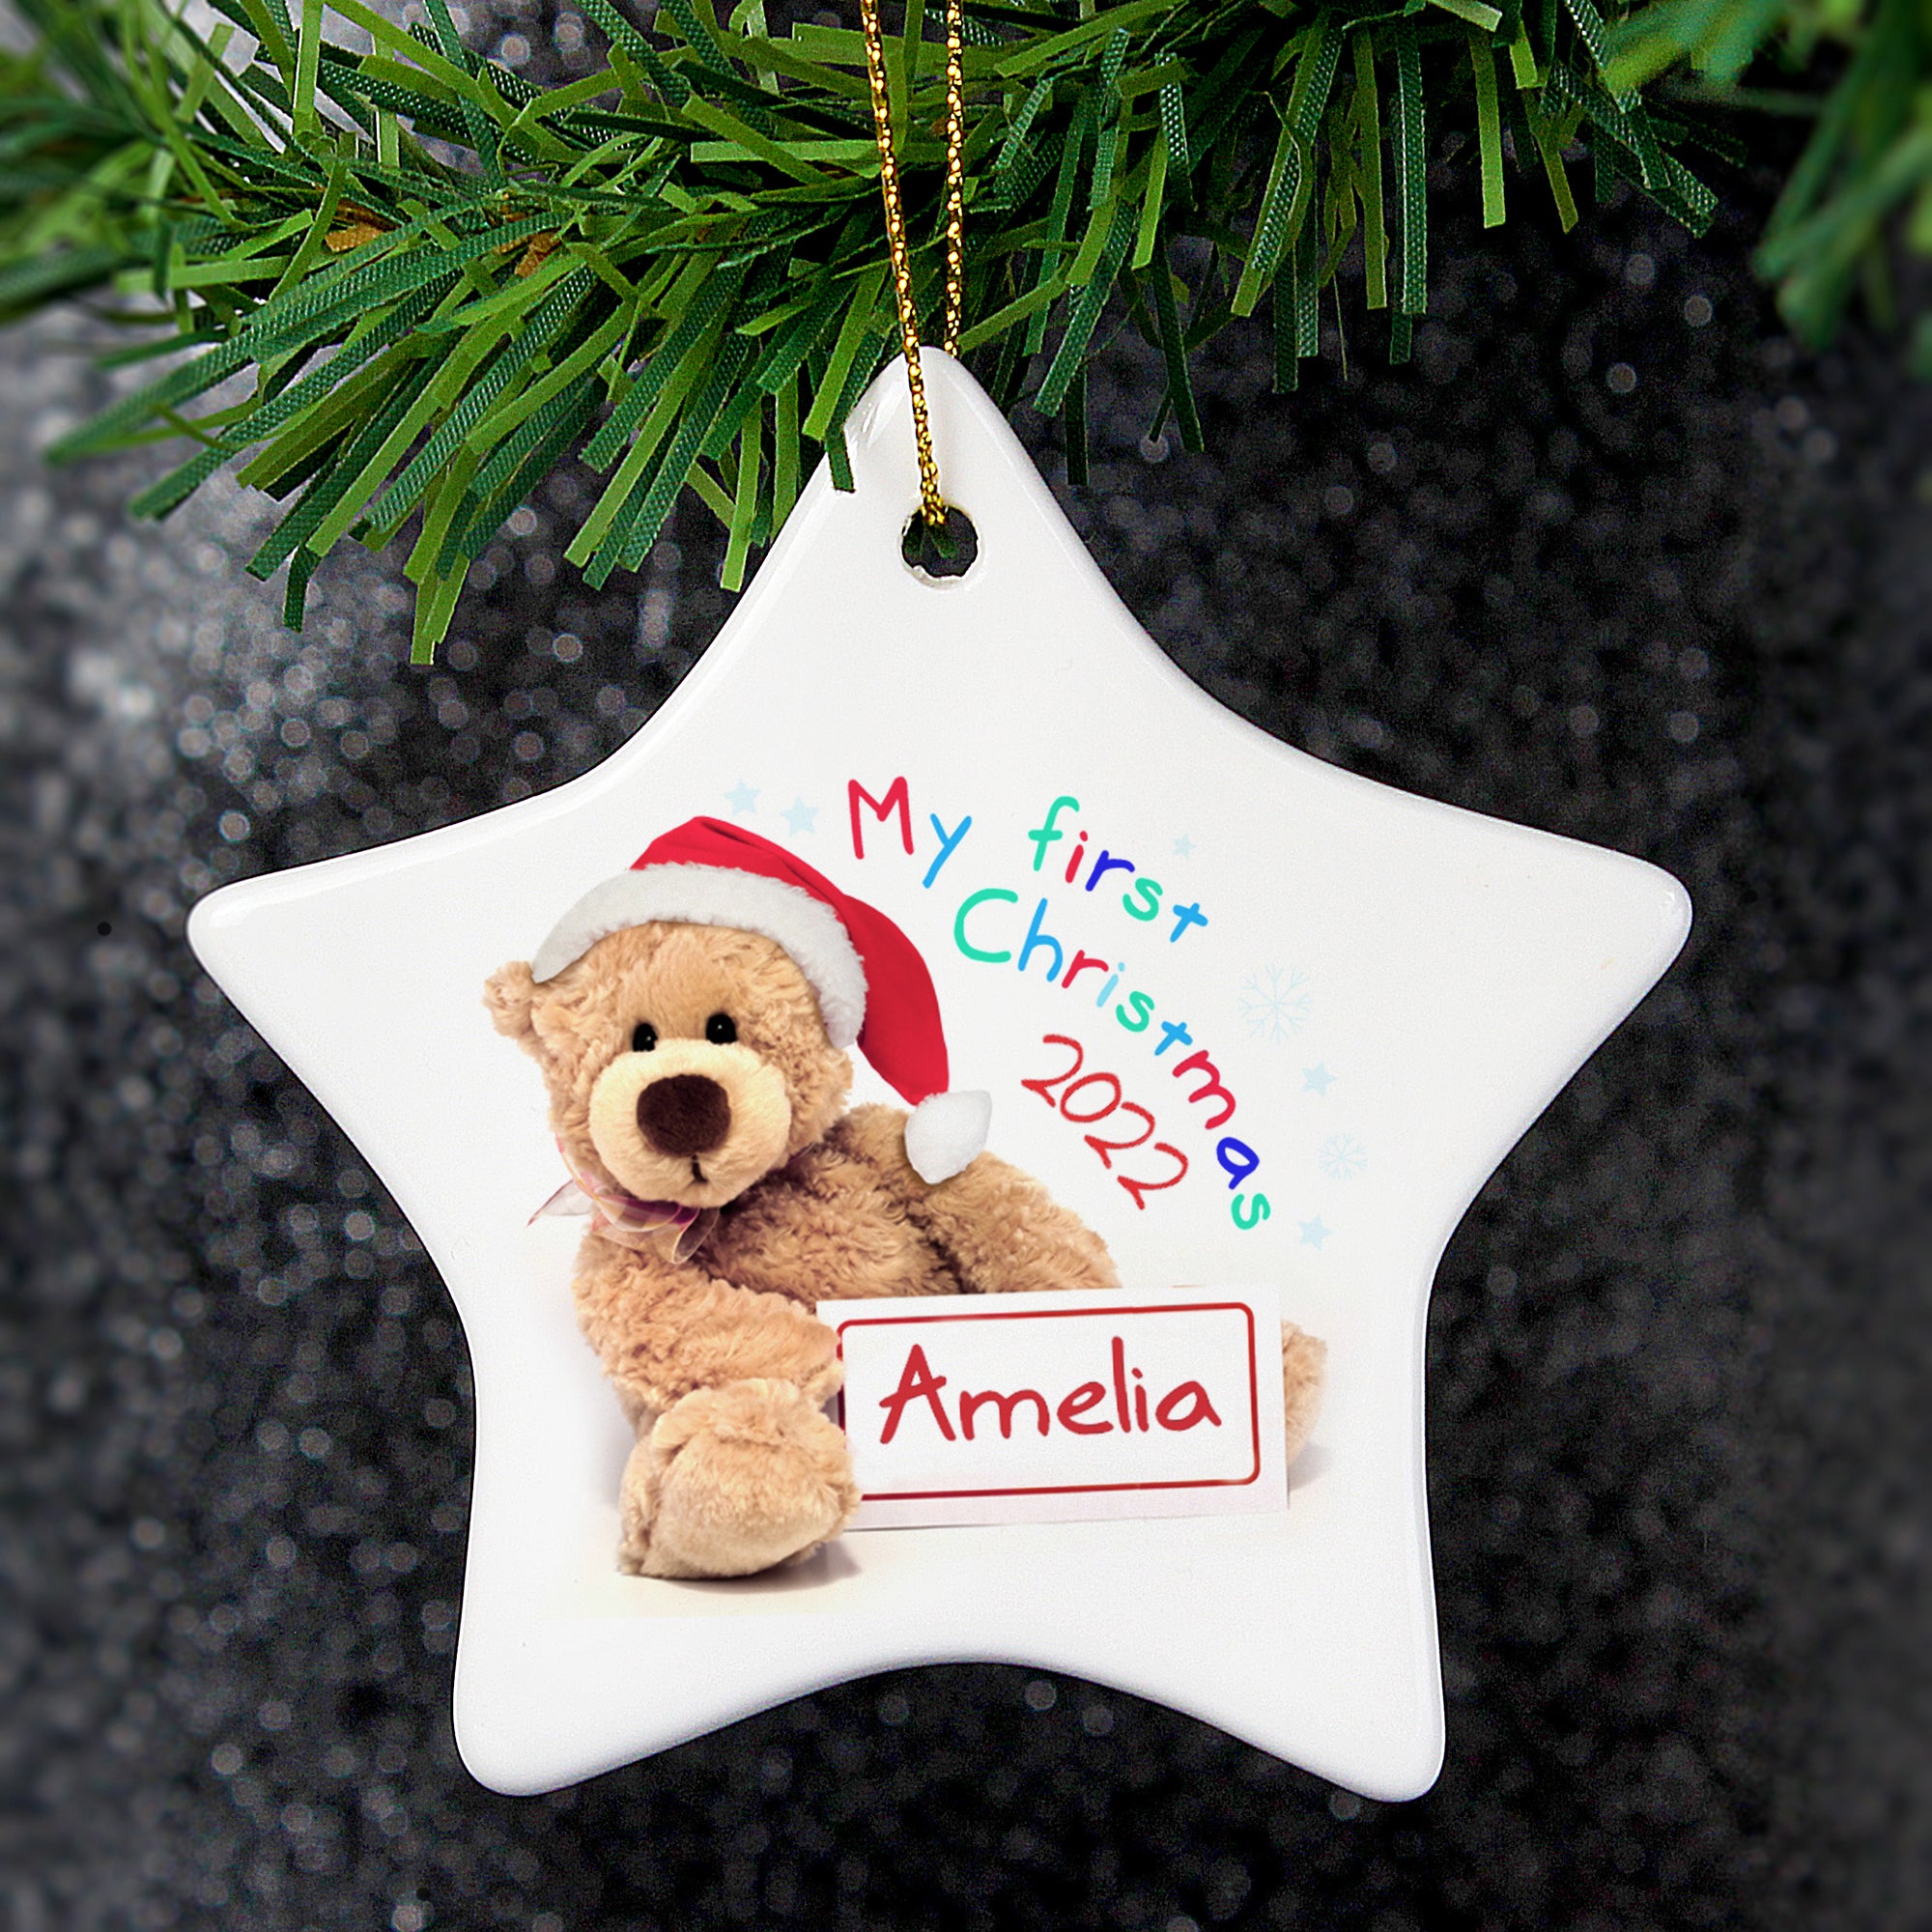 Personalised white ceramic star shaped Christmas decoration with an image of a teddy bear wearing a red and white santa hat and holding a sign which can be personalised with a name of your choice. Next to the bear is the text 'My first Christmas' in bright multi coloured lettering and you can also add a year which will be printed below that in red.